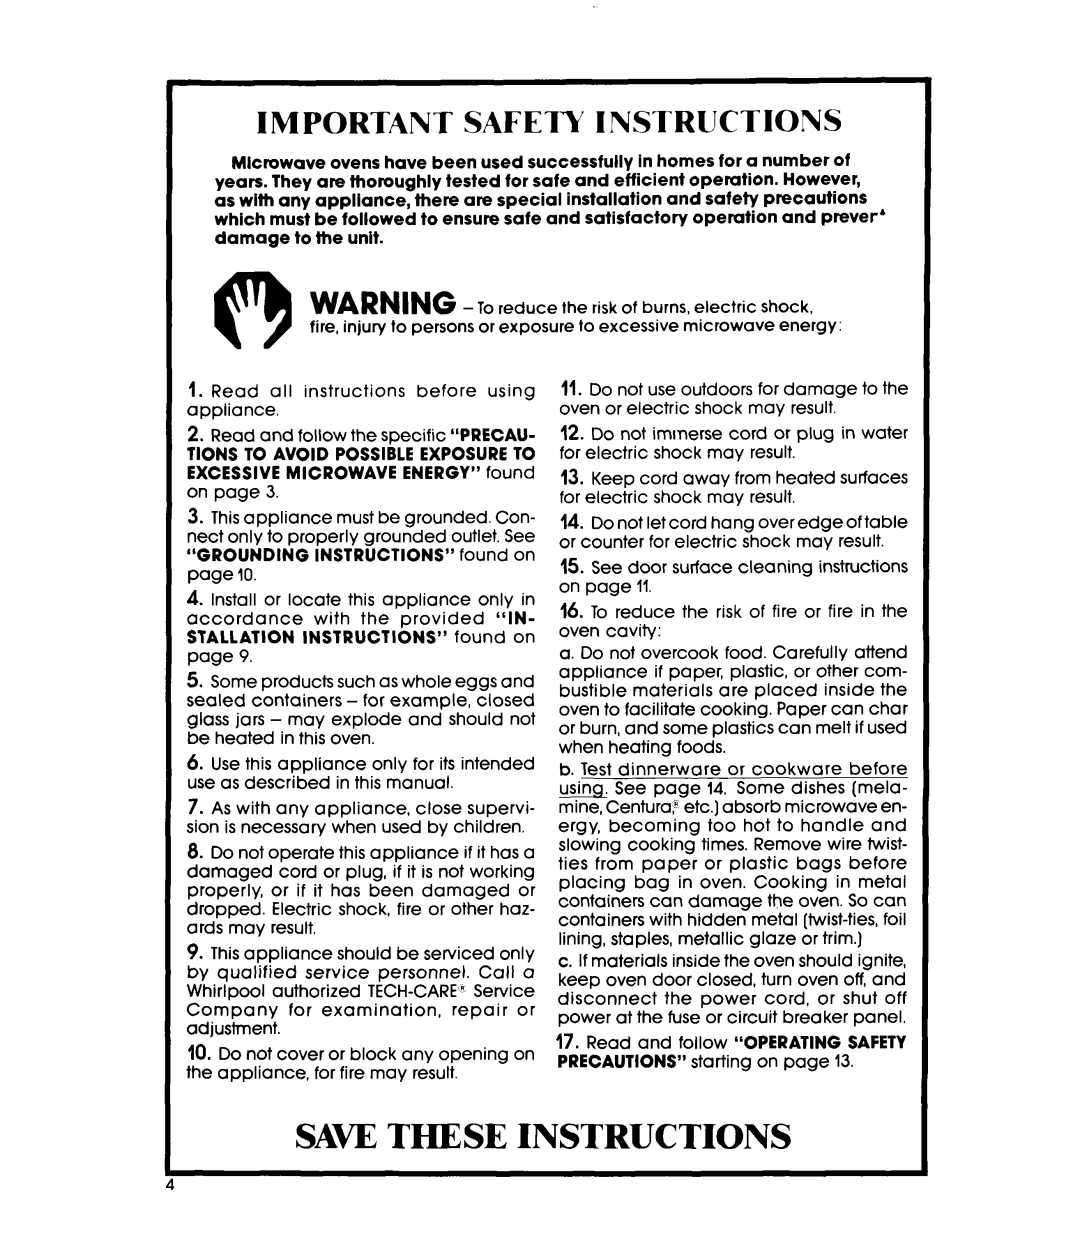 Whirlpool Microwace Oven manual Saw These Instructions, Important Safety Instructions 